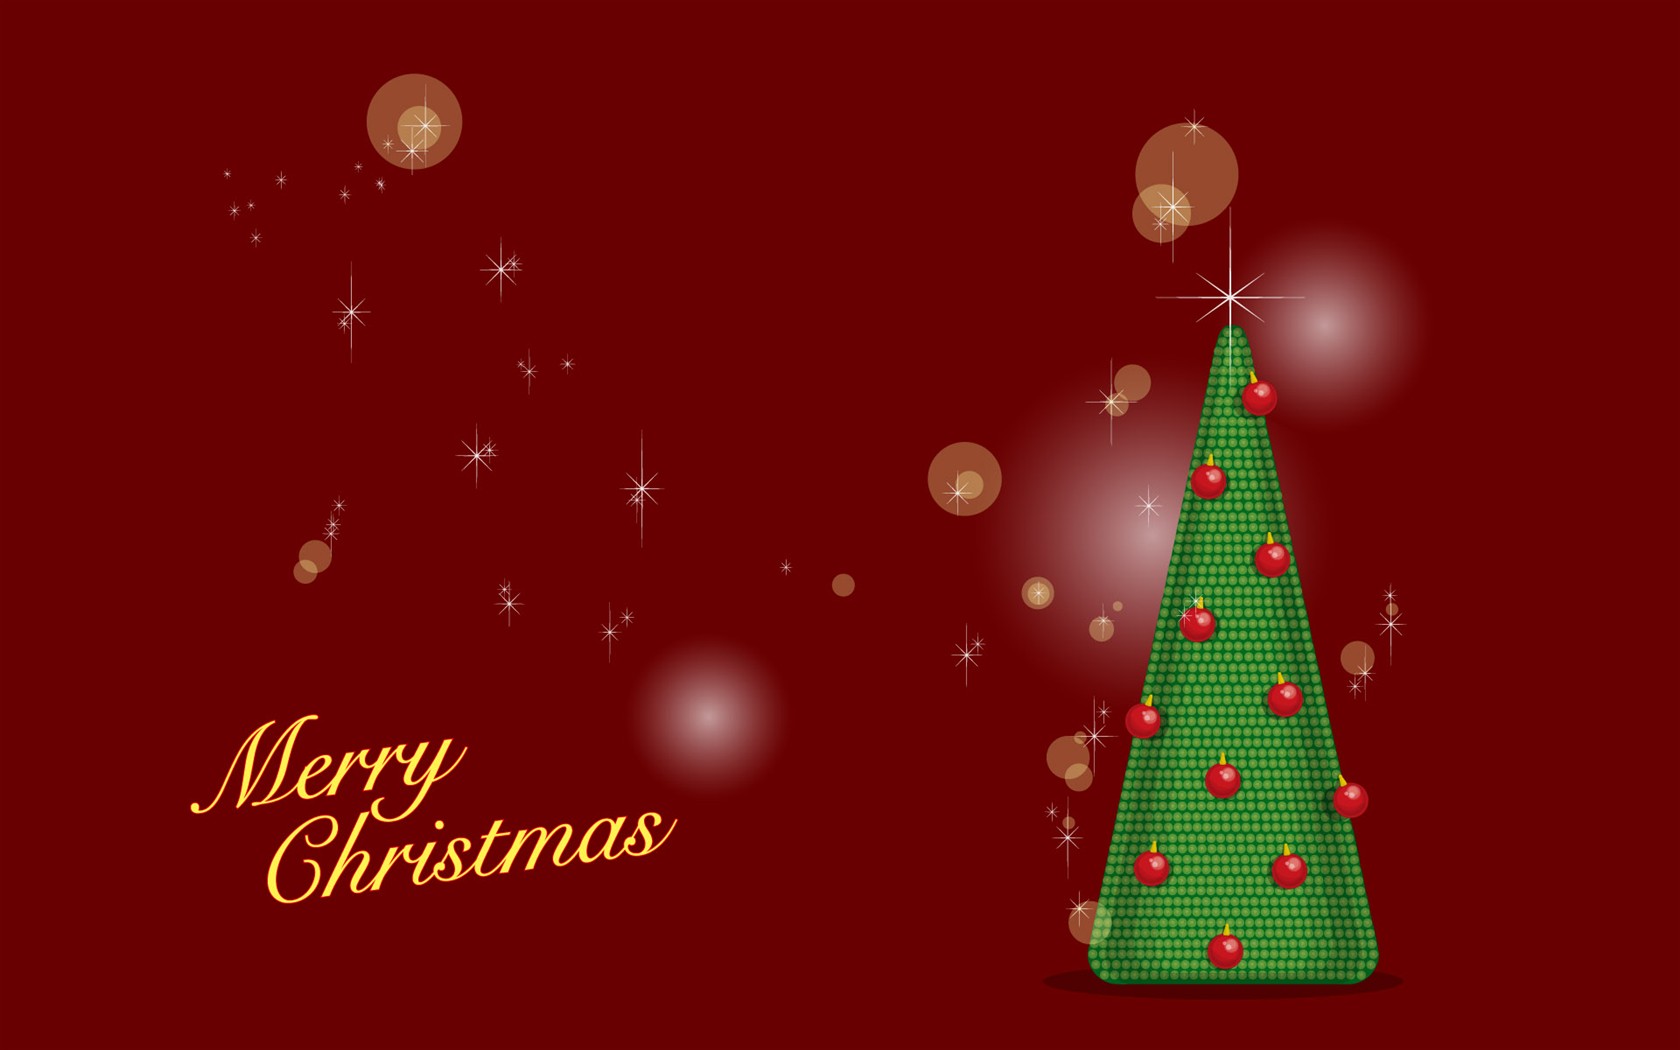 Exquisite Christmas Theme HD Wallpapers #21 - 1680x1050